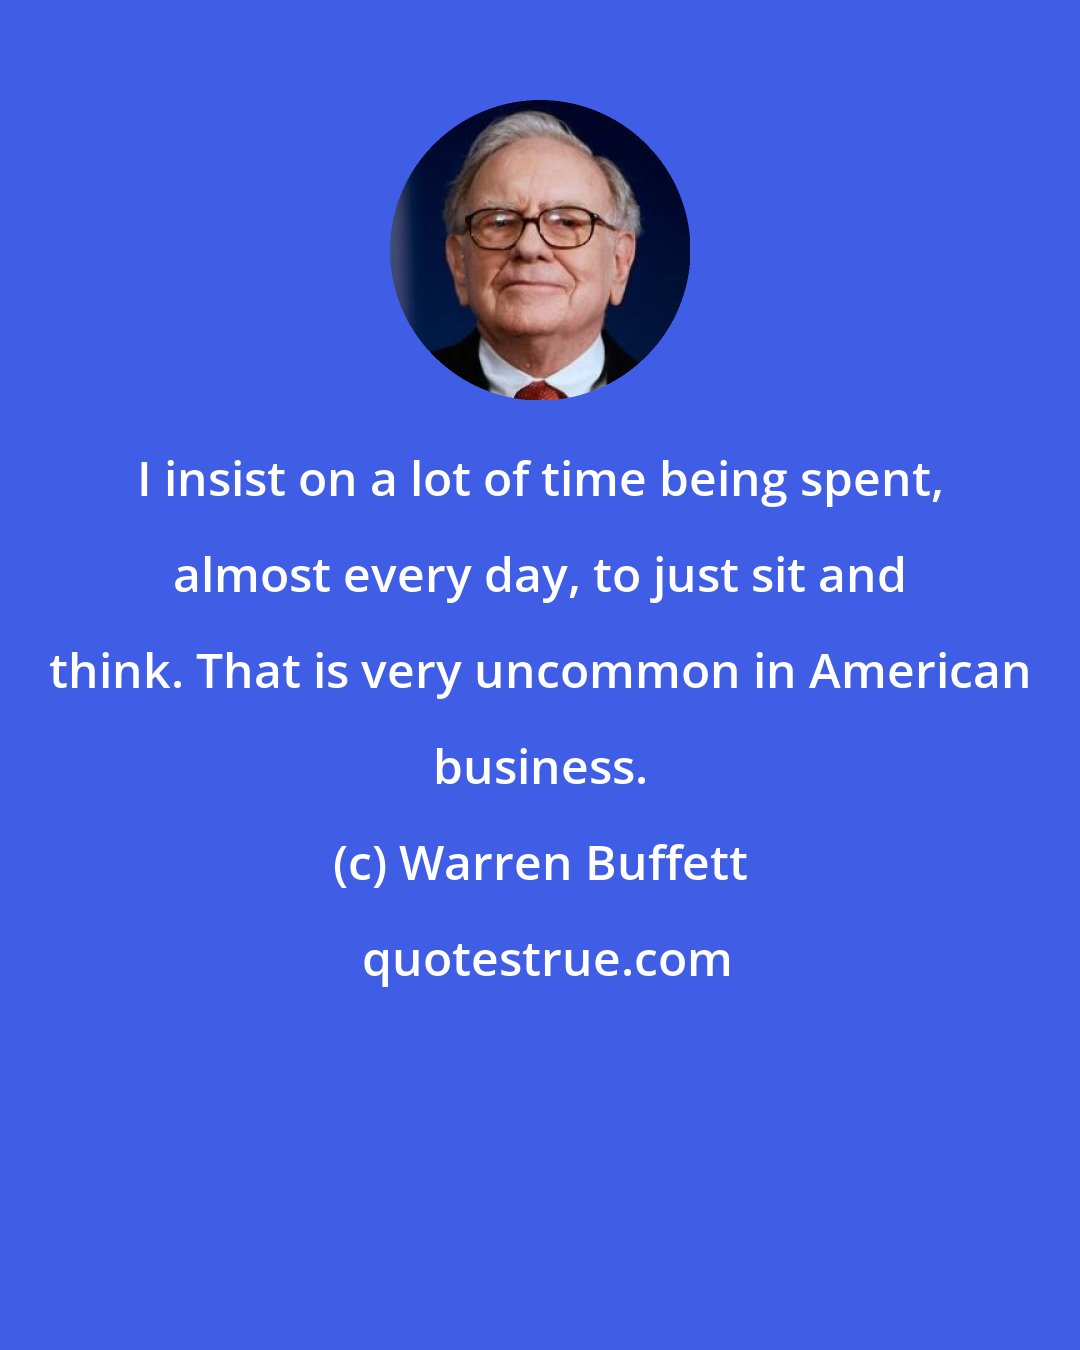 Warren Buffett: I insist on a lot of time being spent, almost every day, to just sit and think. That is very uncommon in American business.